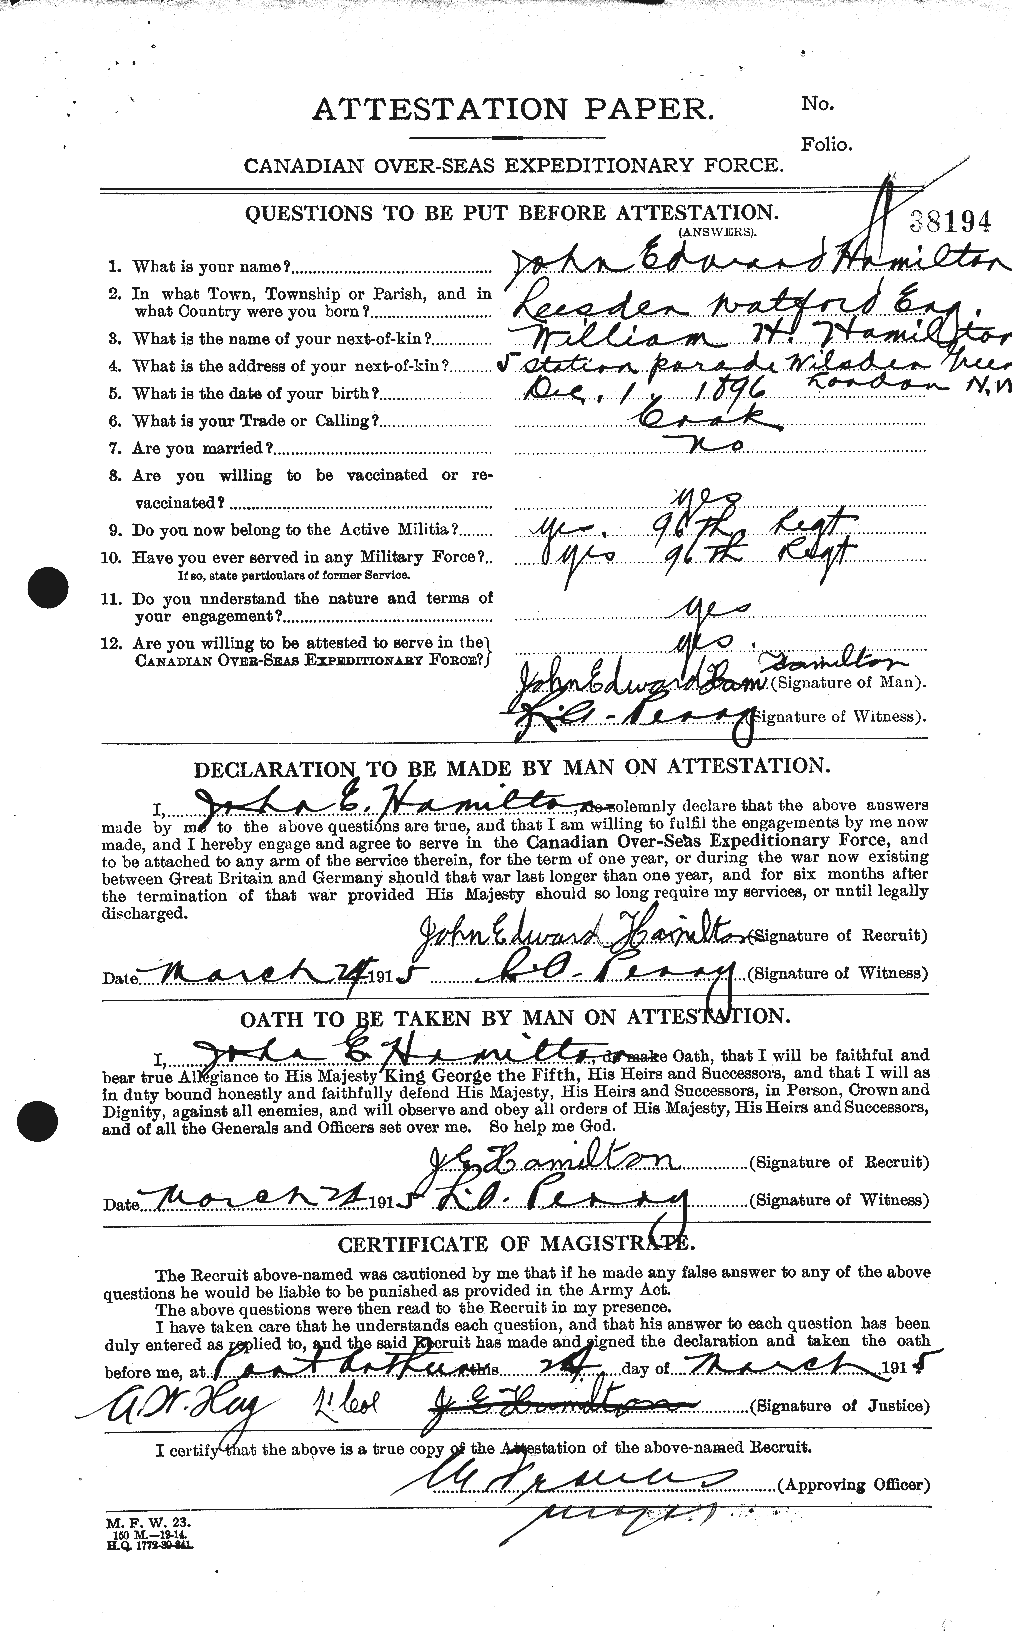 Personnel Records of the First World War - CEF 373081a